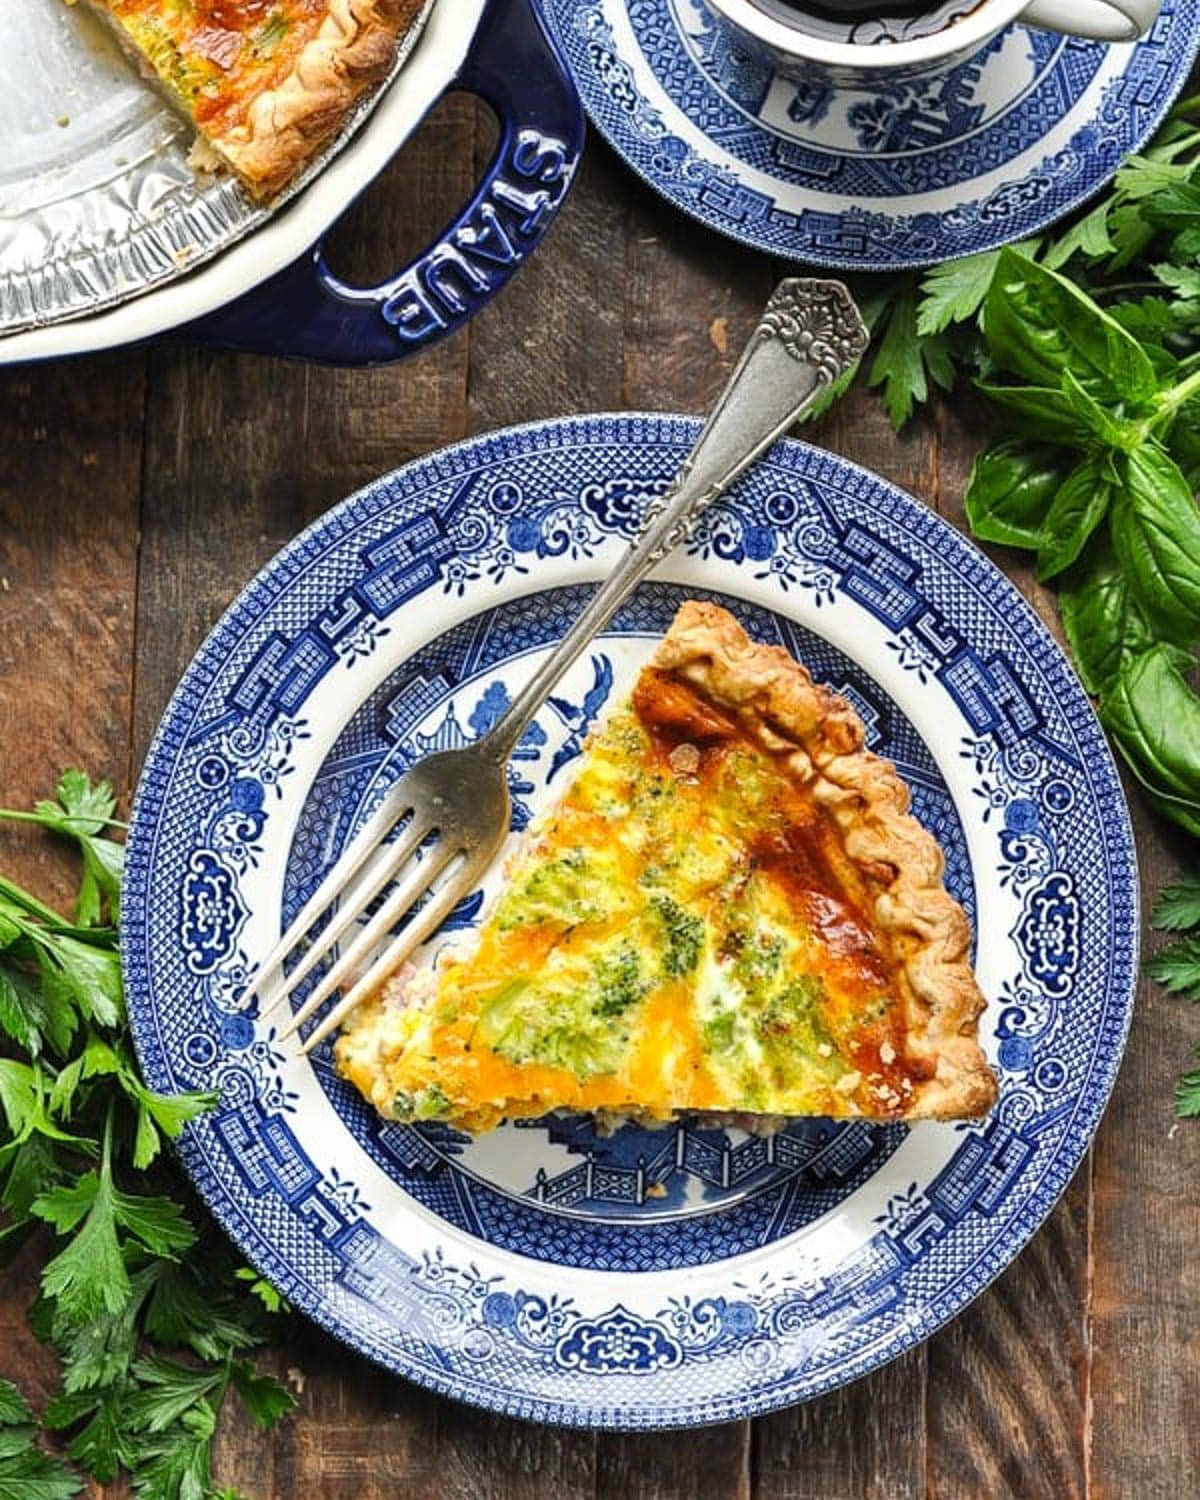 Overhead image of the best ham and broccoli quiche on a plate with a mug of coffee on the side.